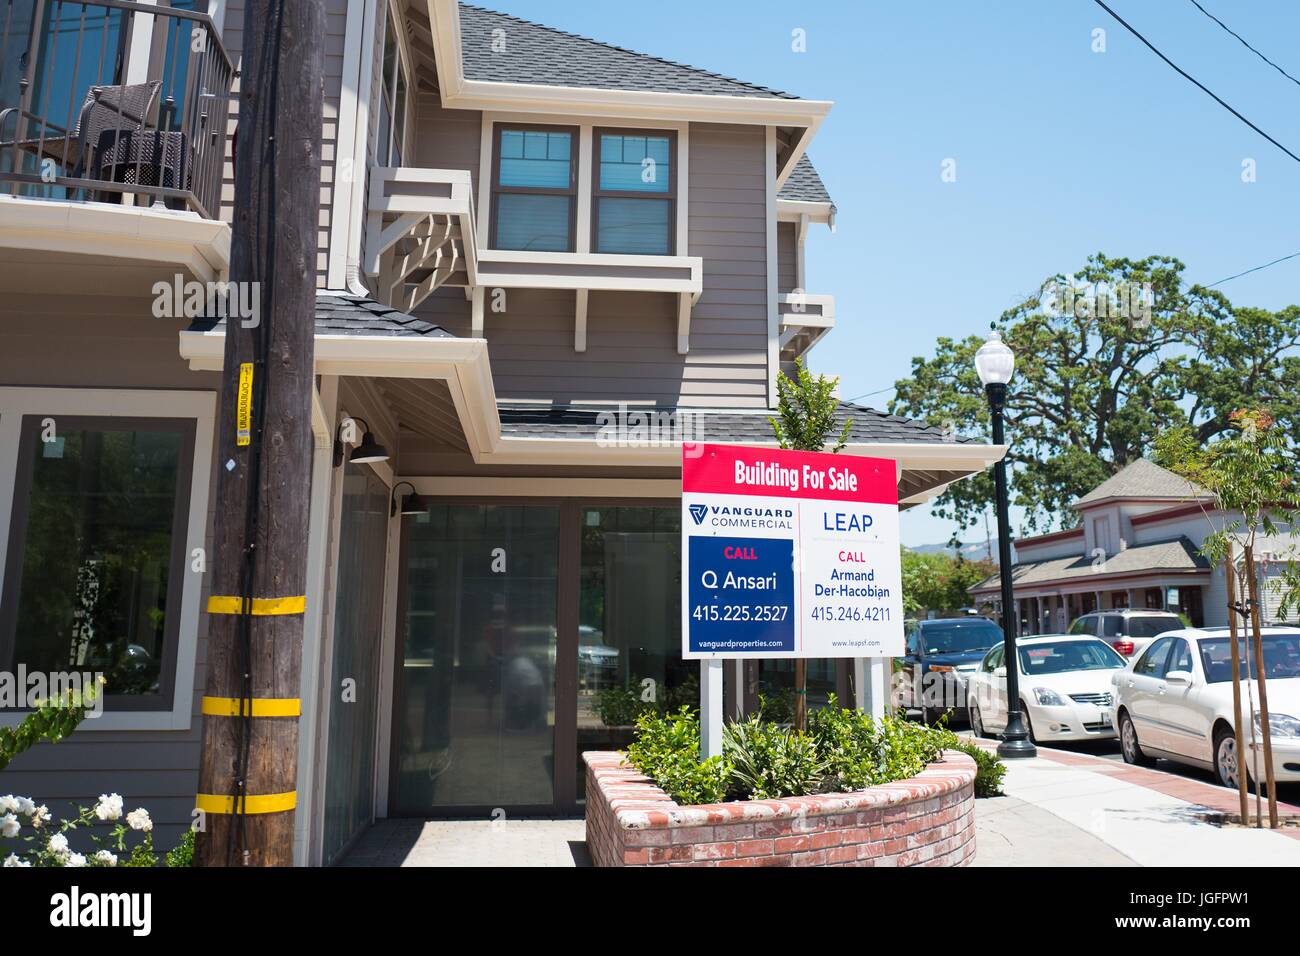 A commercial building is listed for sale in Danville, California, a suburb in the San Francisco Bay Area, June 21, 2017. Bay area real estate, including commercial real estate, is among the most expensive in the world. Stock Photo